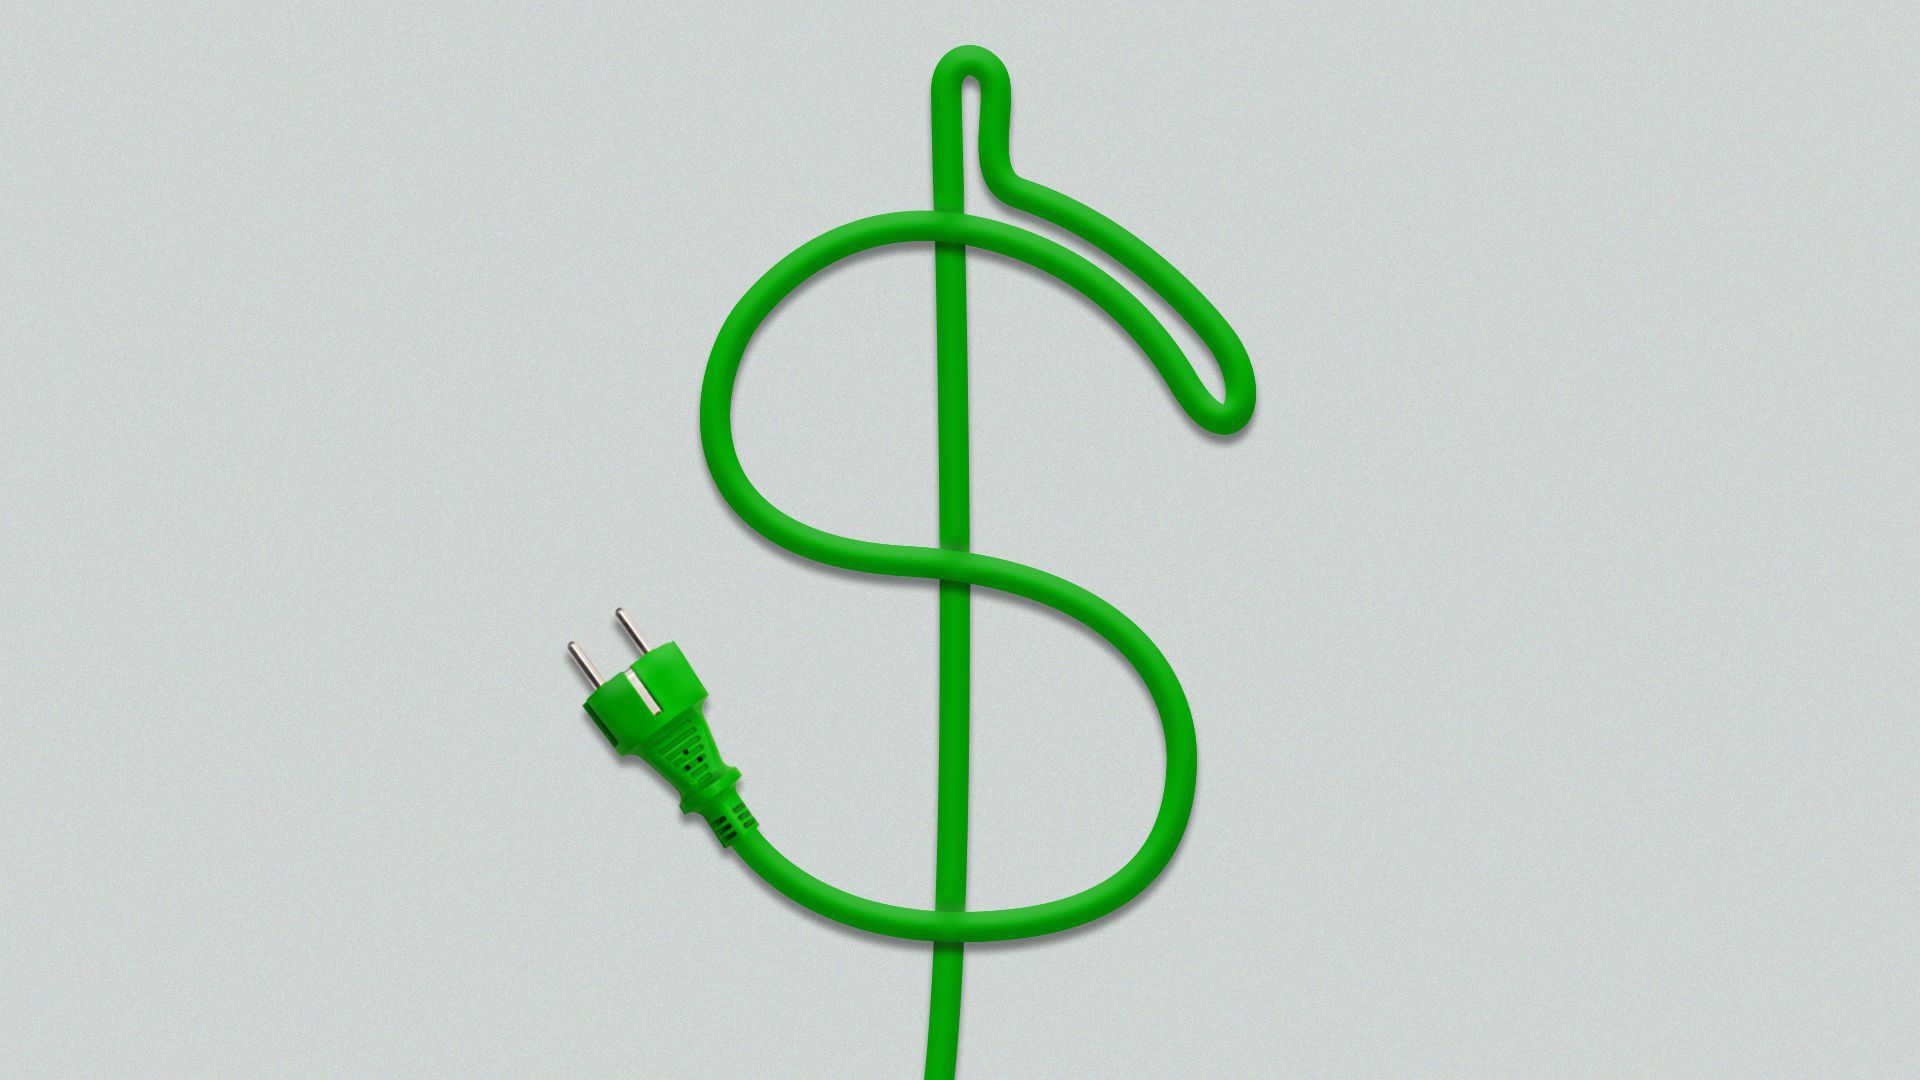 An illustration of a dollar sign made of a charging cable.